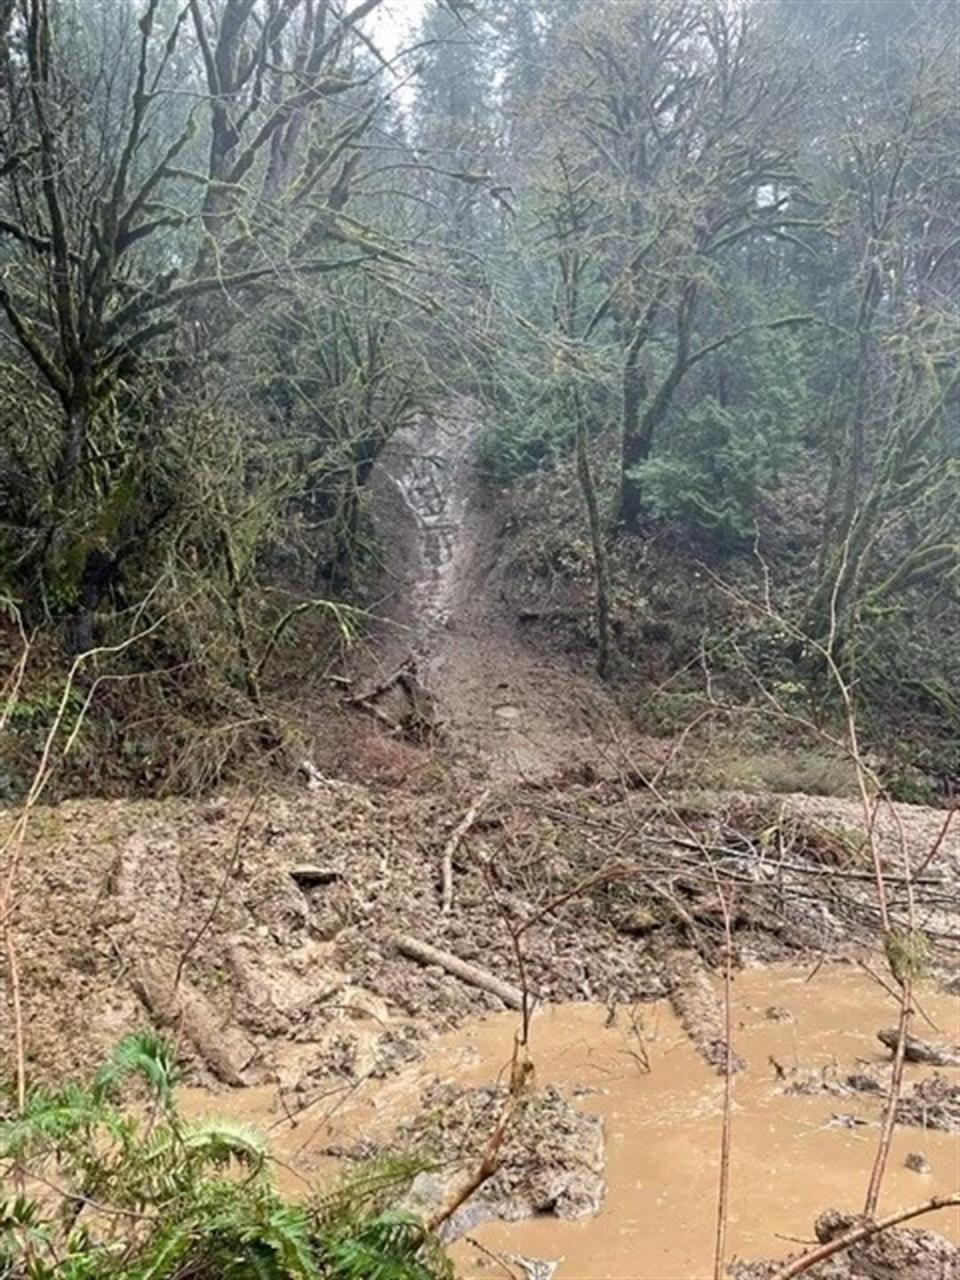 A landslide closed Highway 126 West between Mapleton and Florence for nearly a day. It reopened Tuesday, Dec. 21.